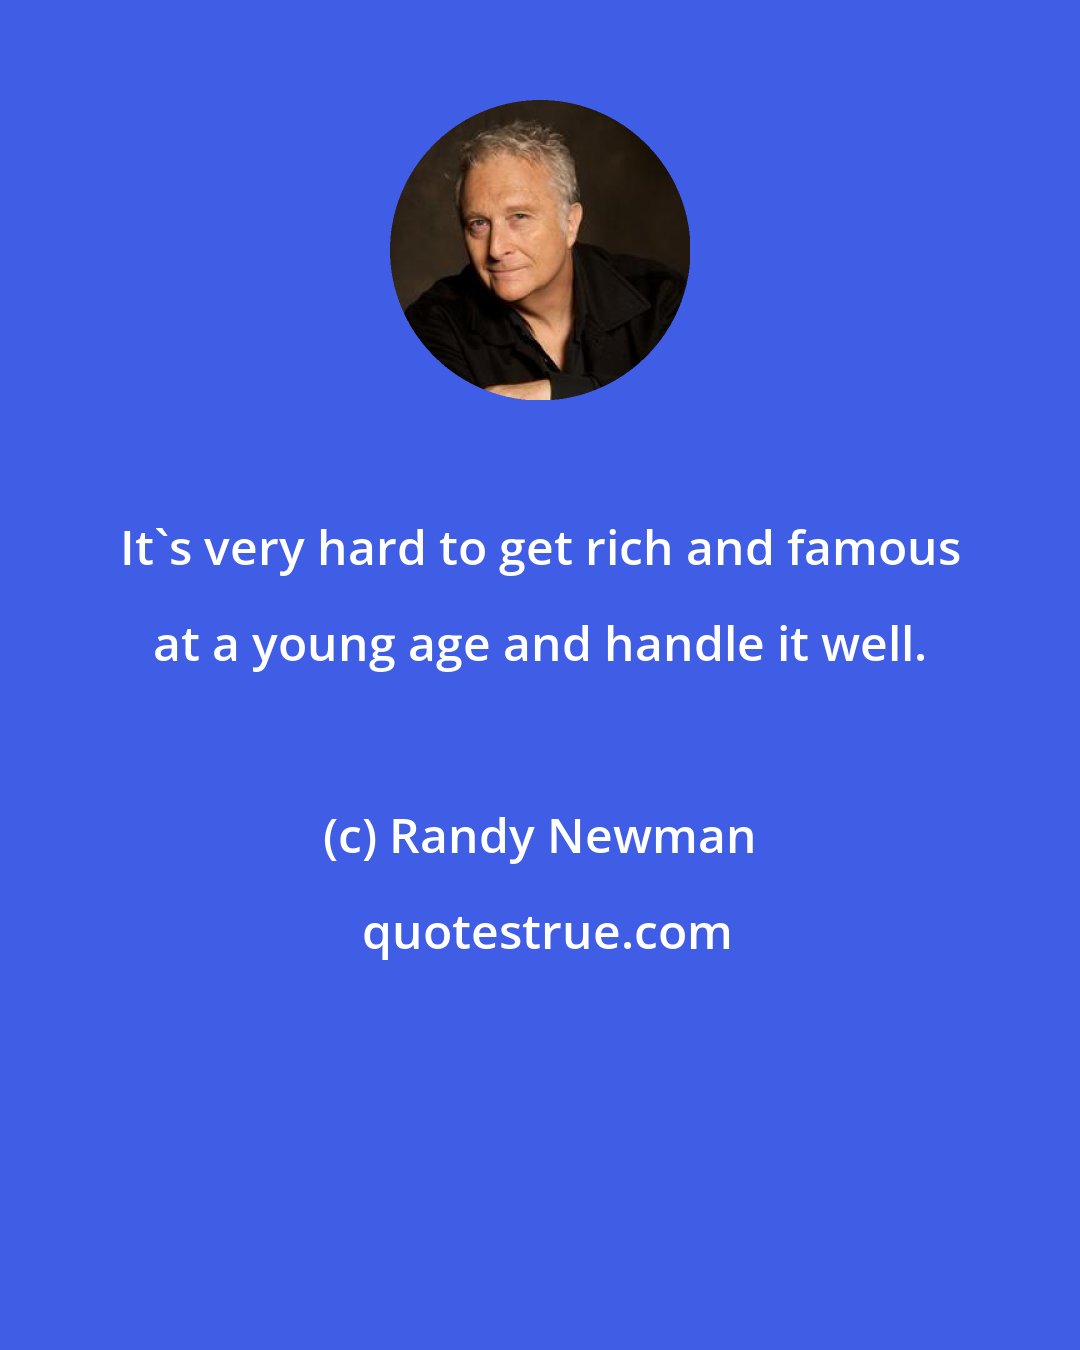 Randy Newman: It's very hard to get rich and famous at a young age and handle it well.